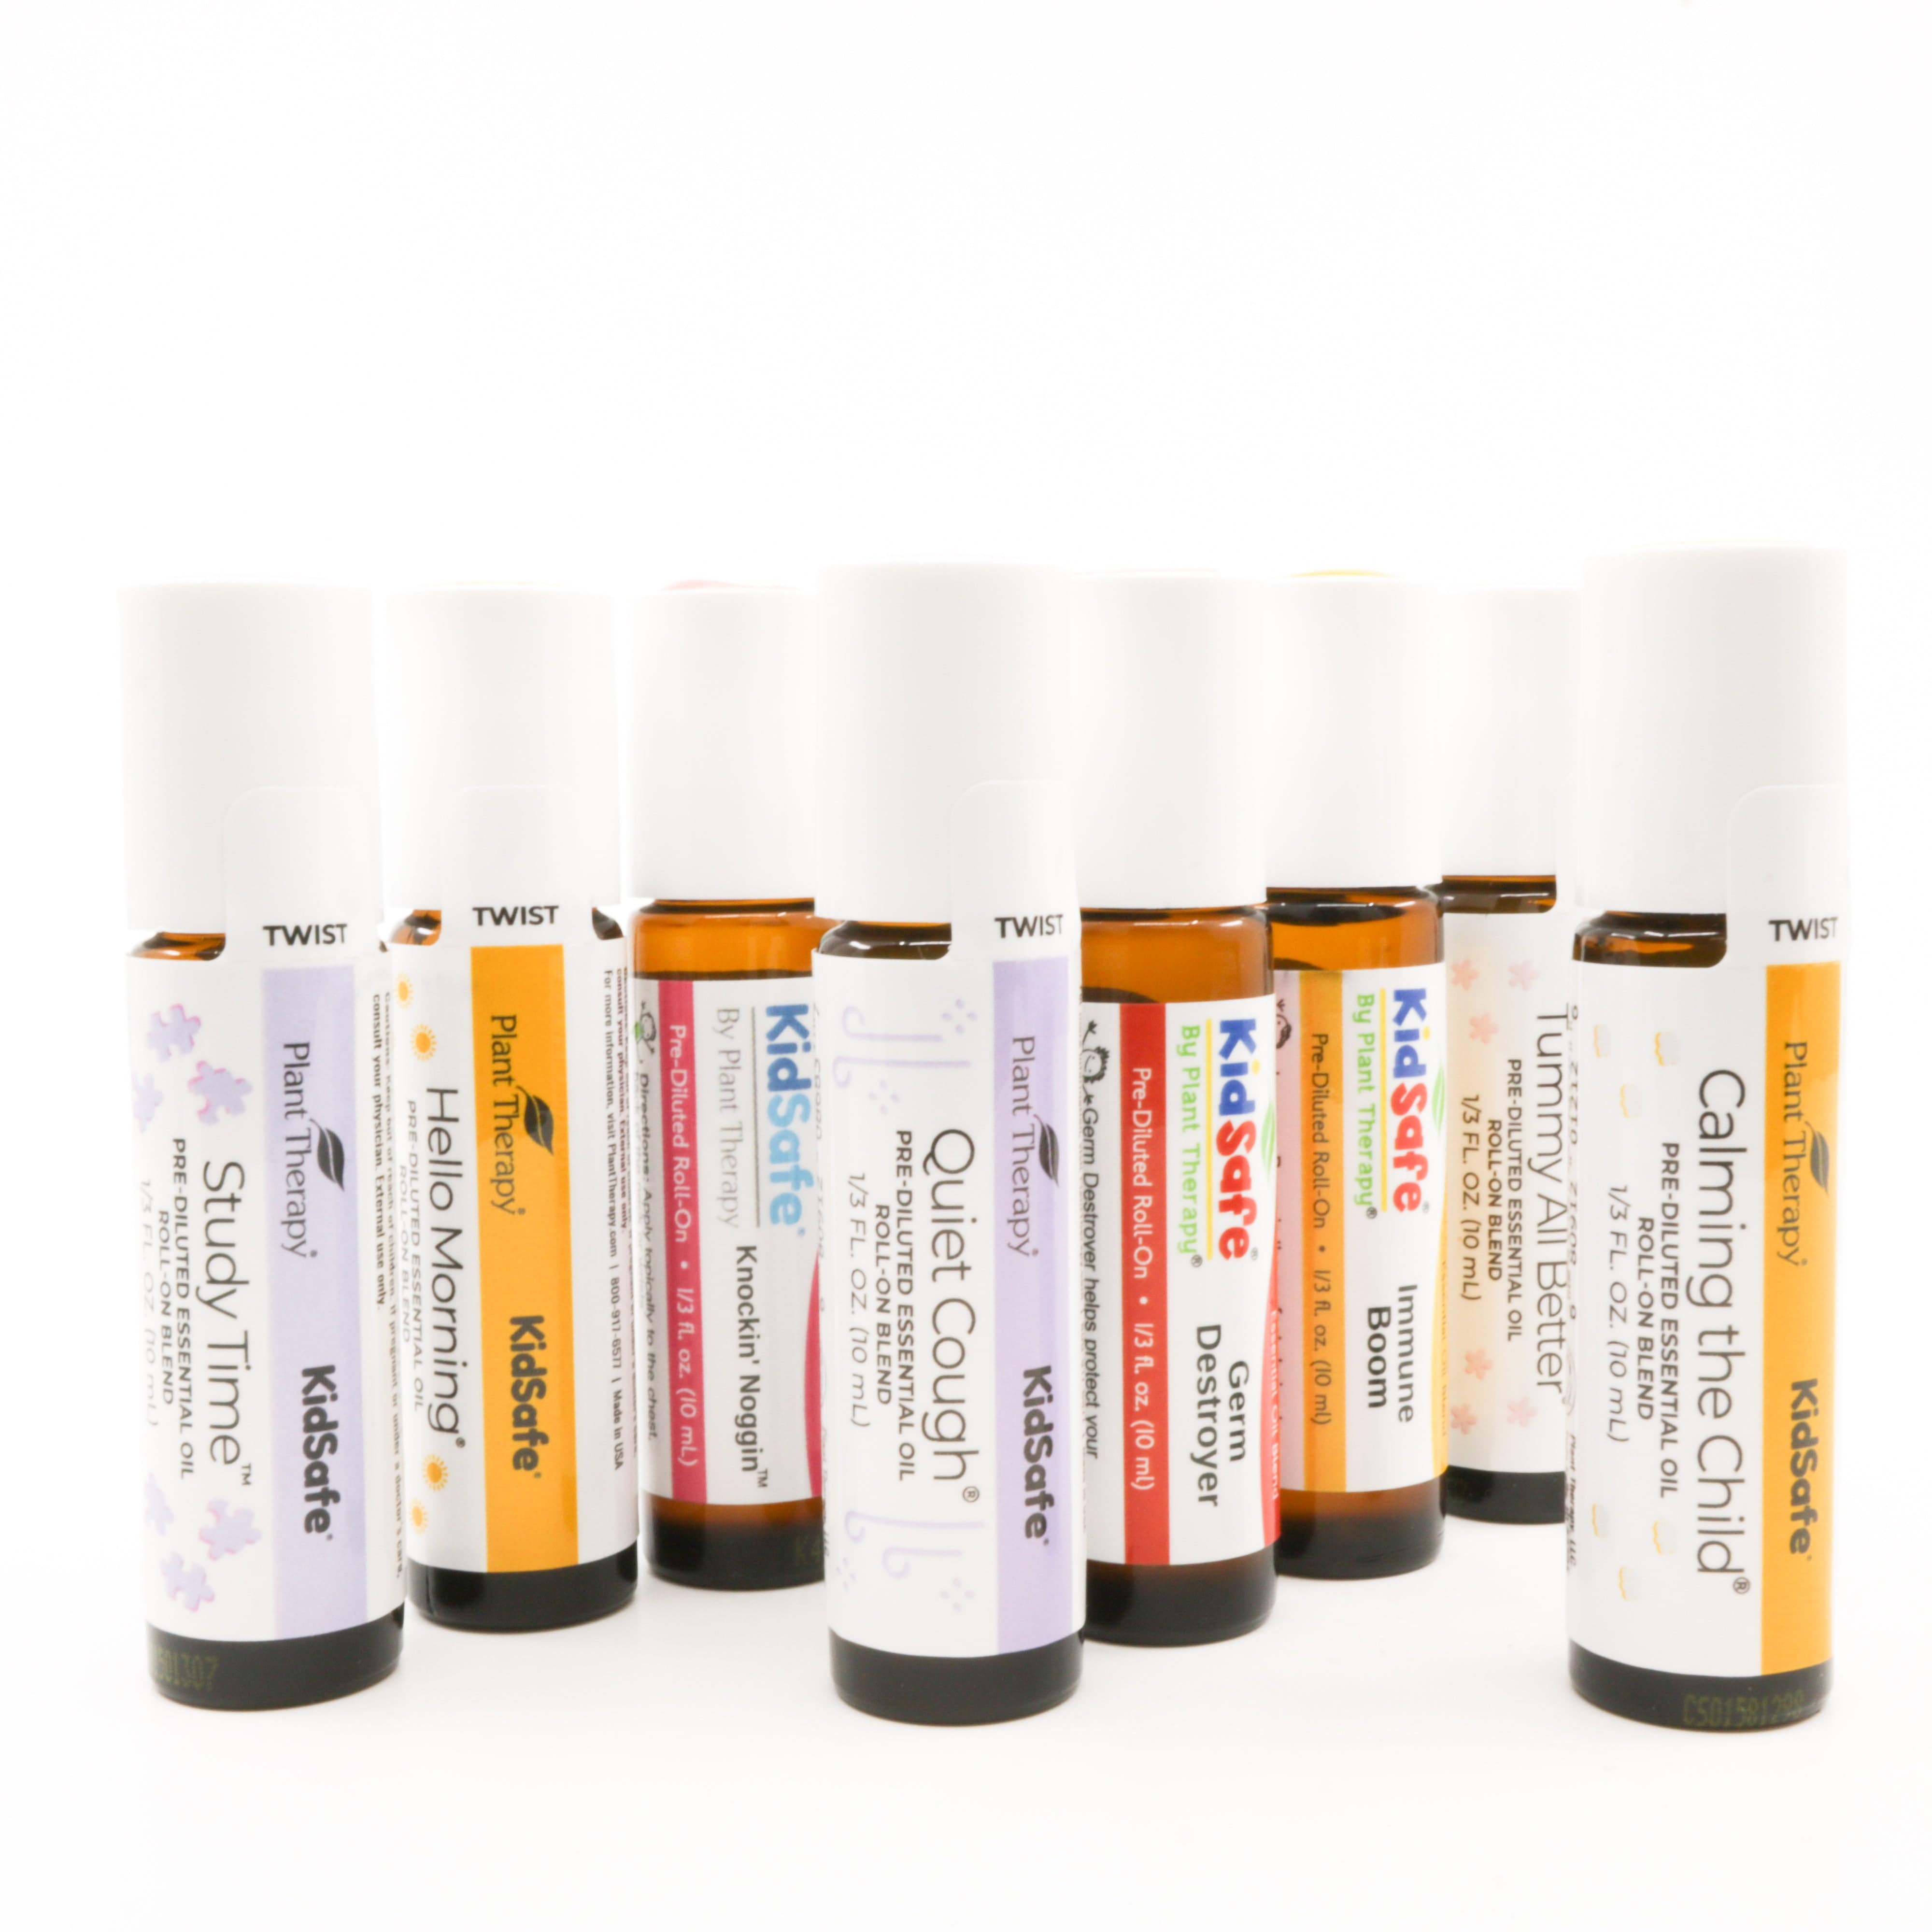 Tummy All Better Kidsafe Pre-Diluted Essential Oil Rollerball Blend - The Mockingbird Apothecary & General Store